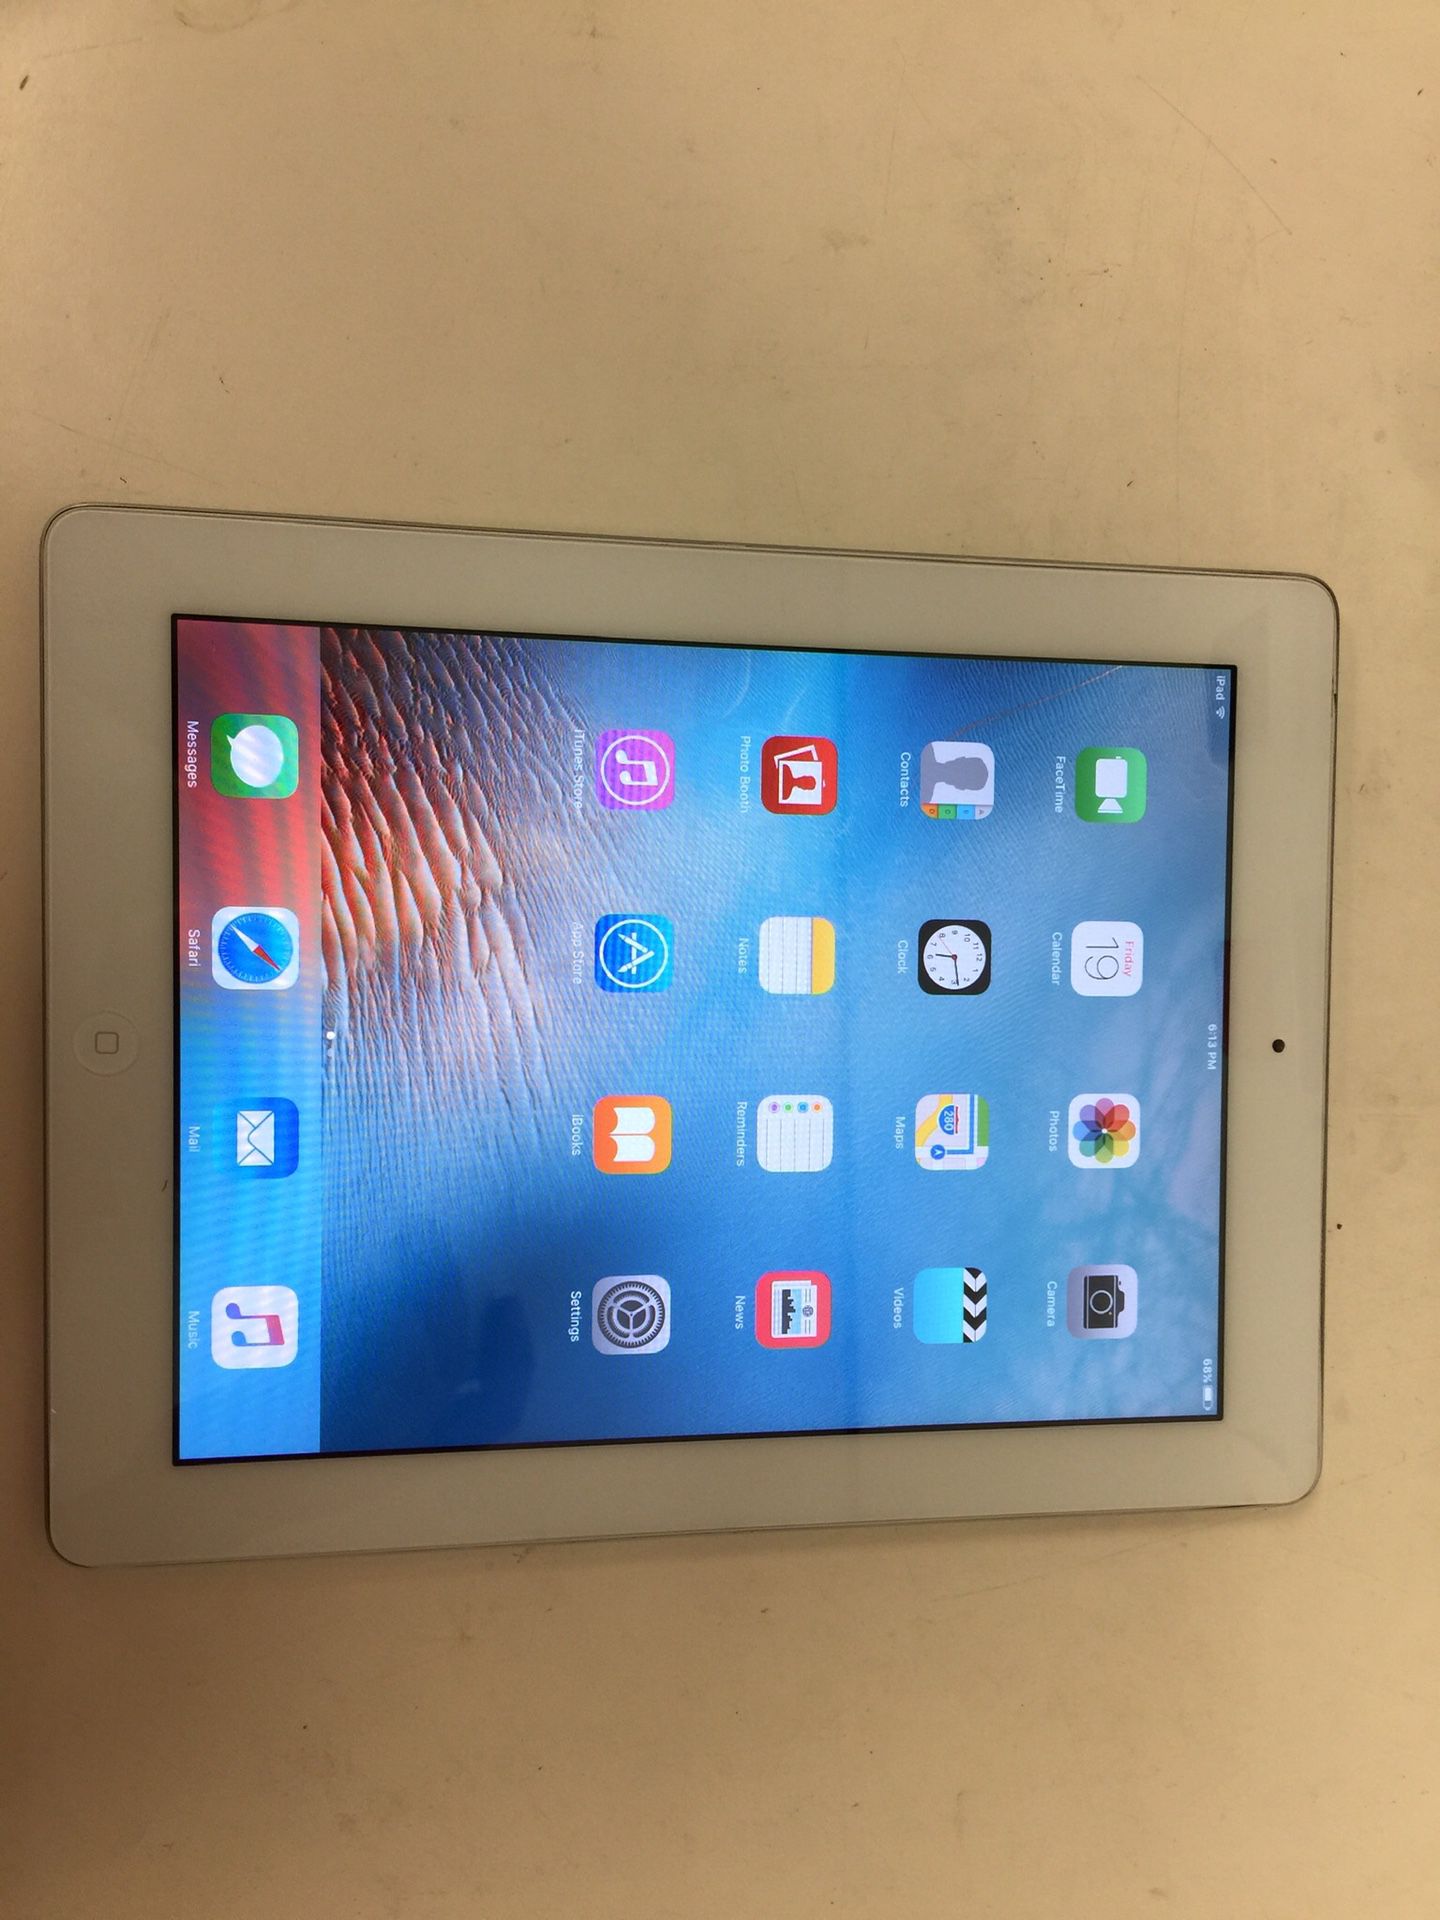 Apple ipad 2 32gb wifi with charger good condition